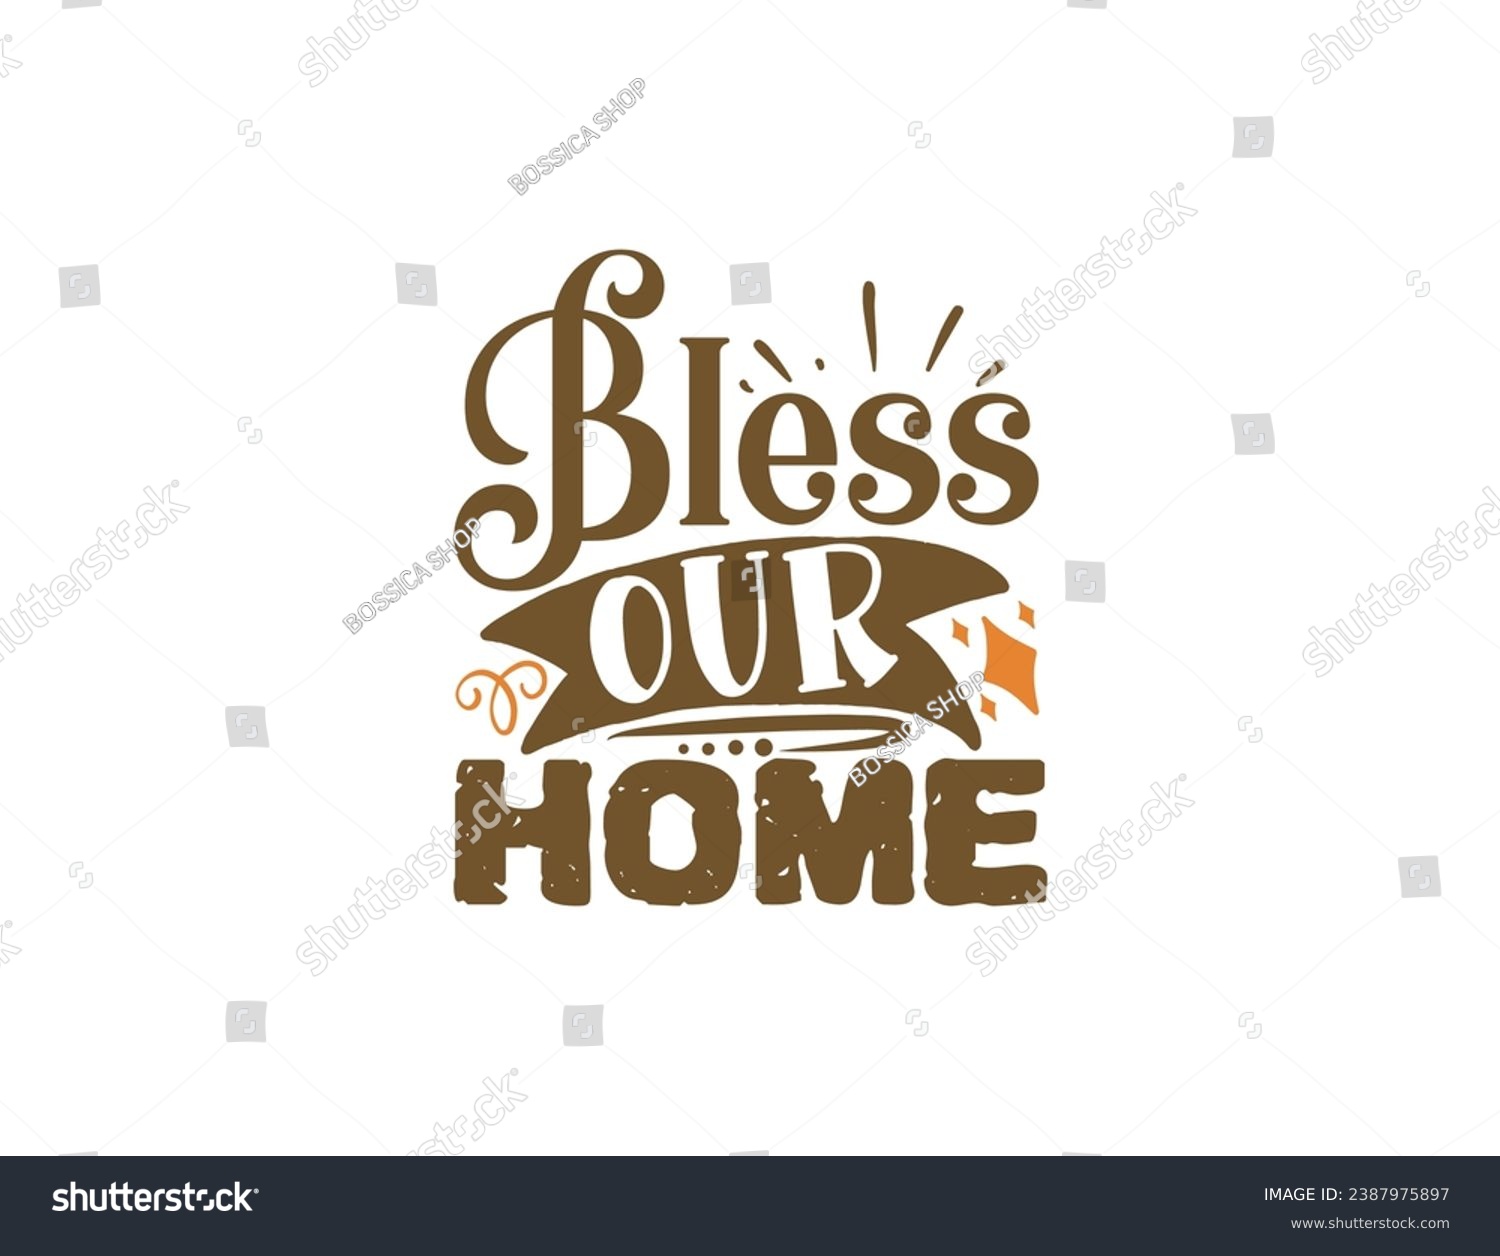 SVG of happy thanksgiving - Bless our home - Typography t-shirt design for apparel, poster, illustration. Modern, simple, lettering t shirt vector svg